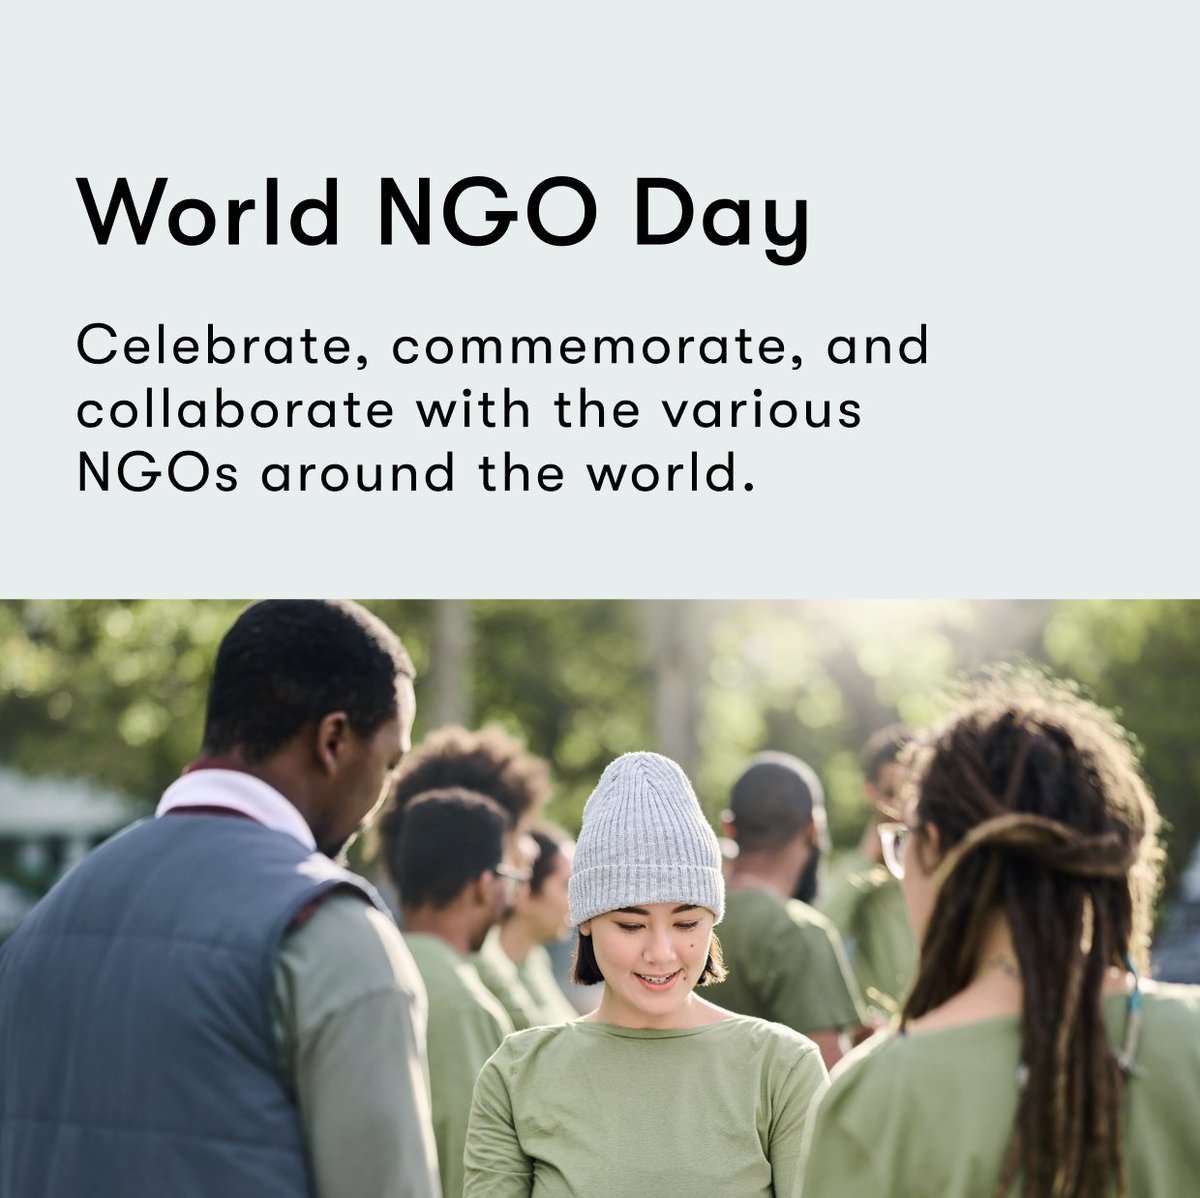 Today is World NGO Day - a day to celebrate, commemorate, and collaborate with the various NGOs around the world ✨ We want to take this opportunity to give you a platform to talk about you and your colleagues work 🌍